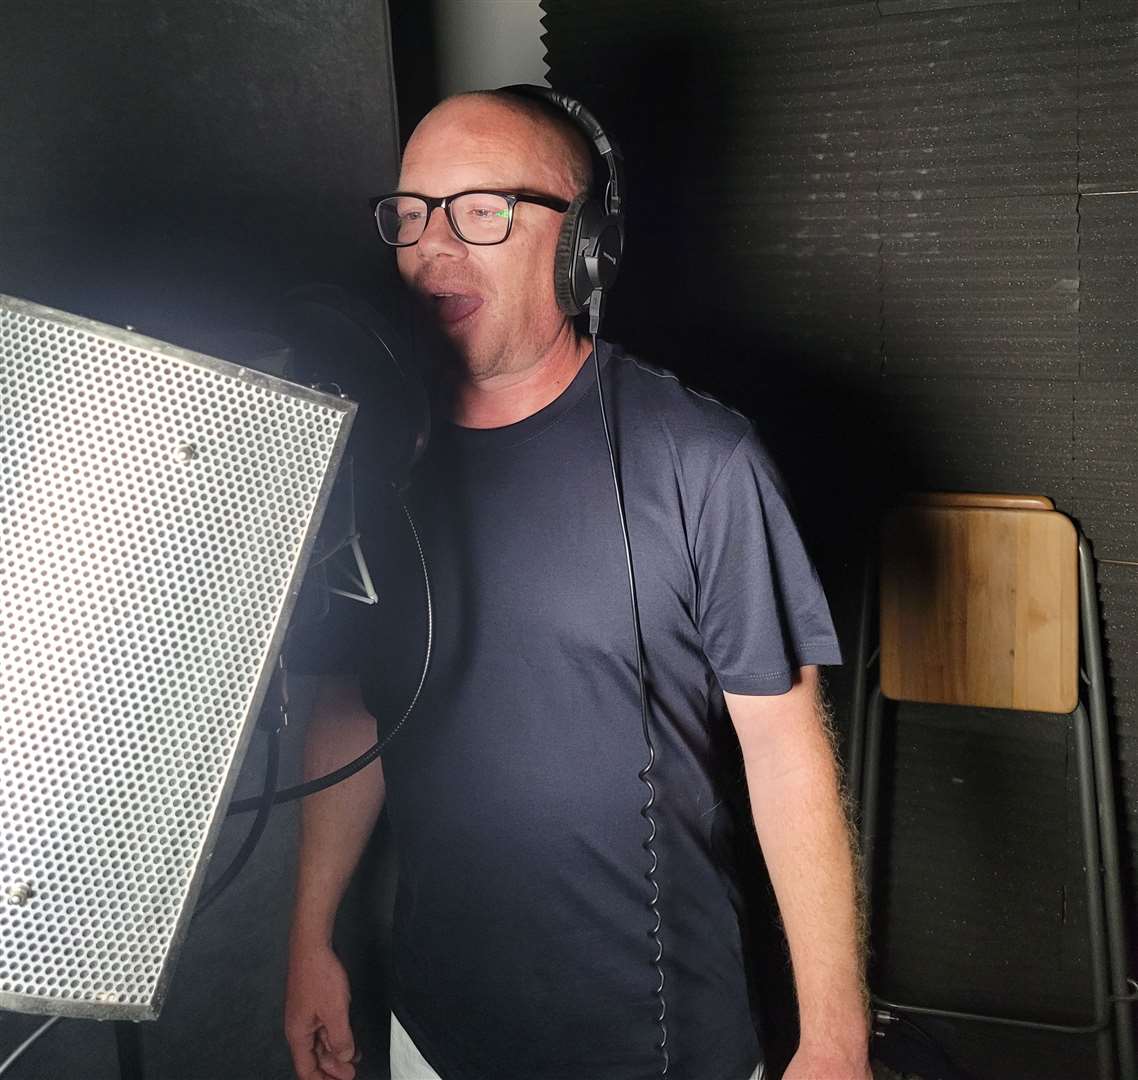 Greg Laker recording his World Cup song We're Going All The Way